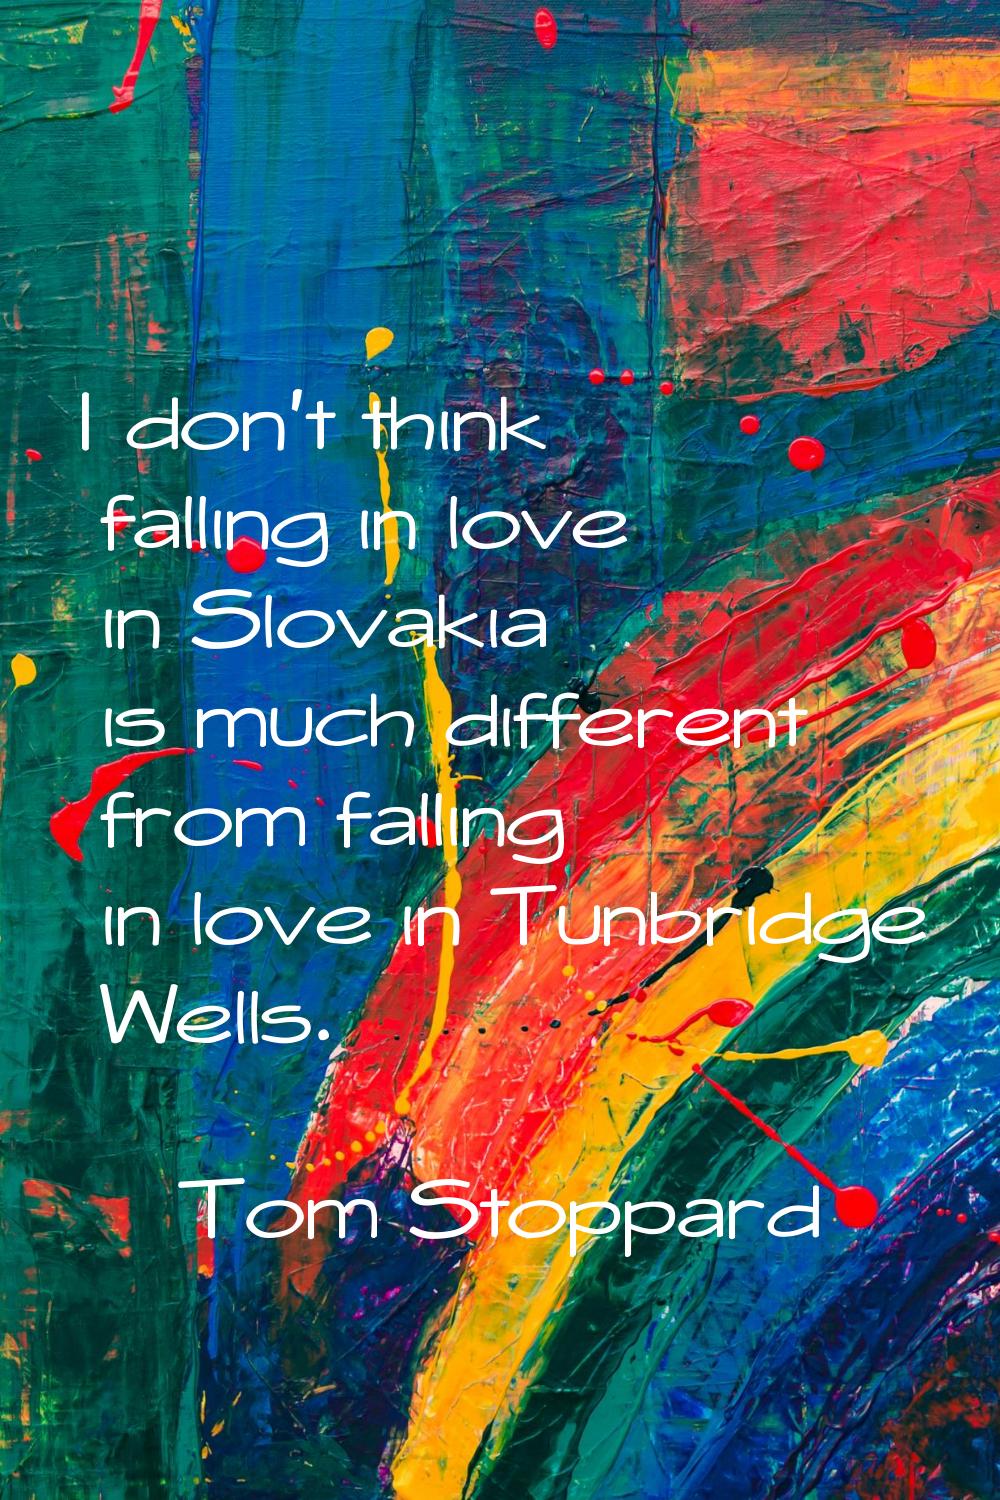 I don't think falling in love in Slovakia is much different from falling in love in Tunbridge Wells